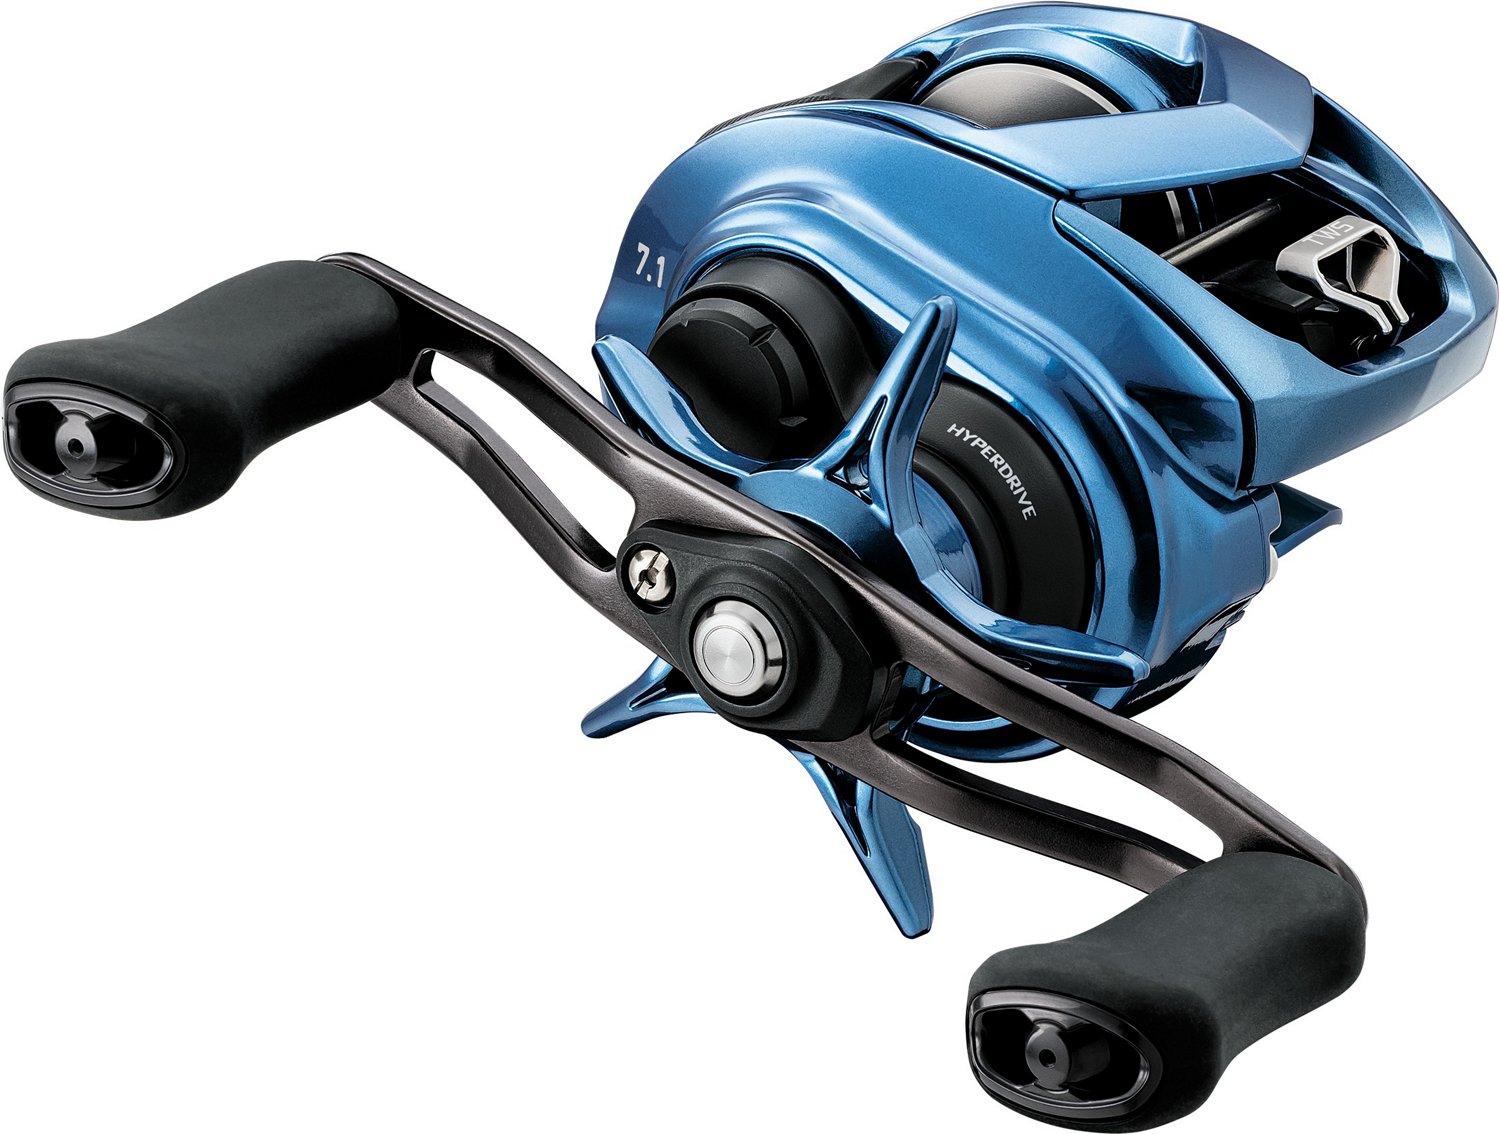 5 Types of Fishing Reels to Catch More Fish